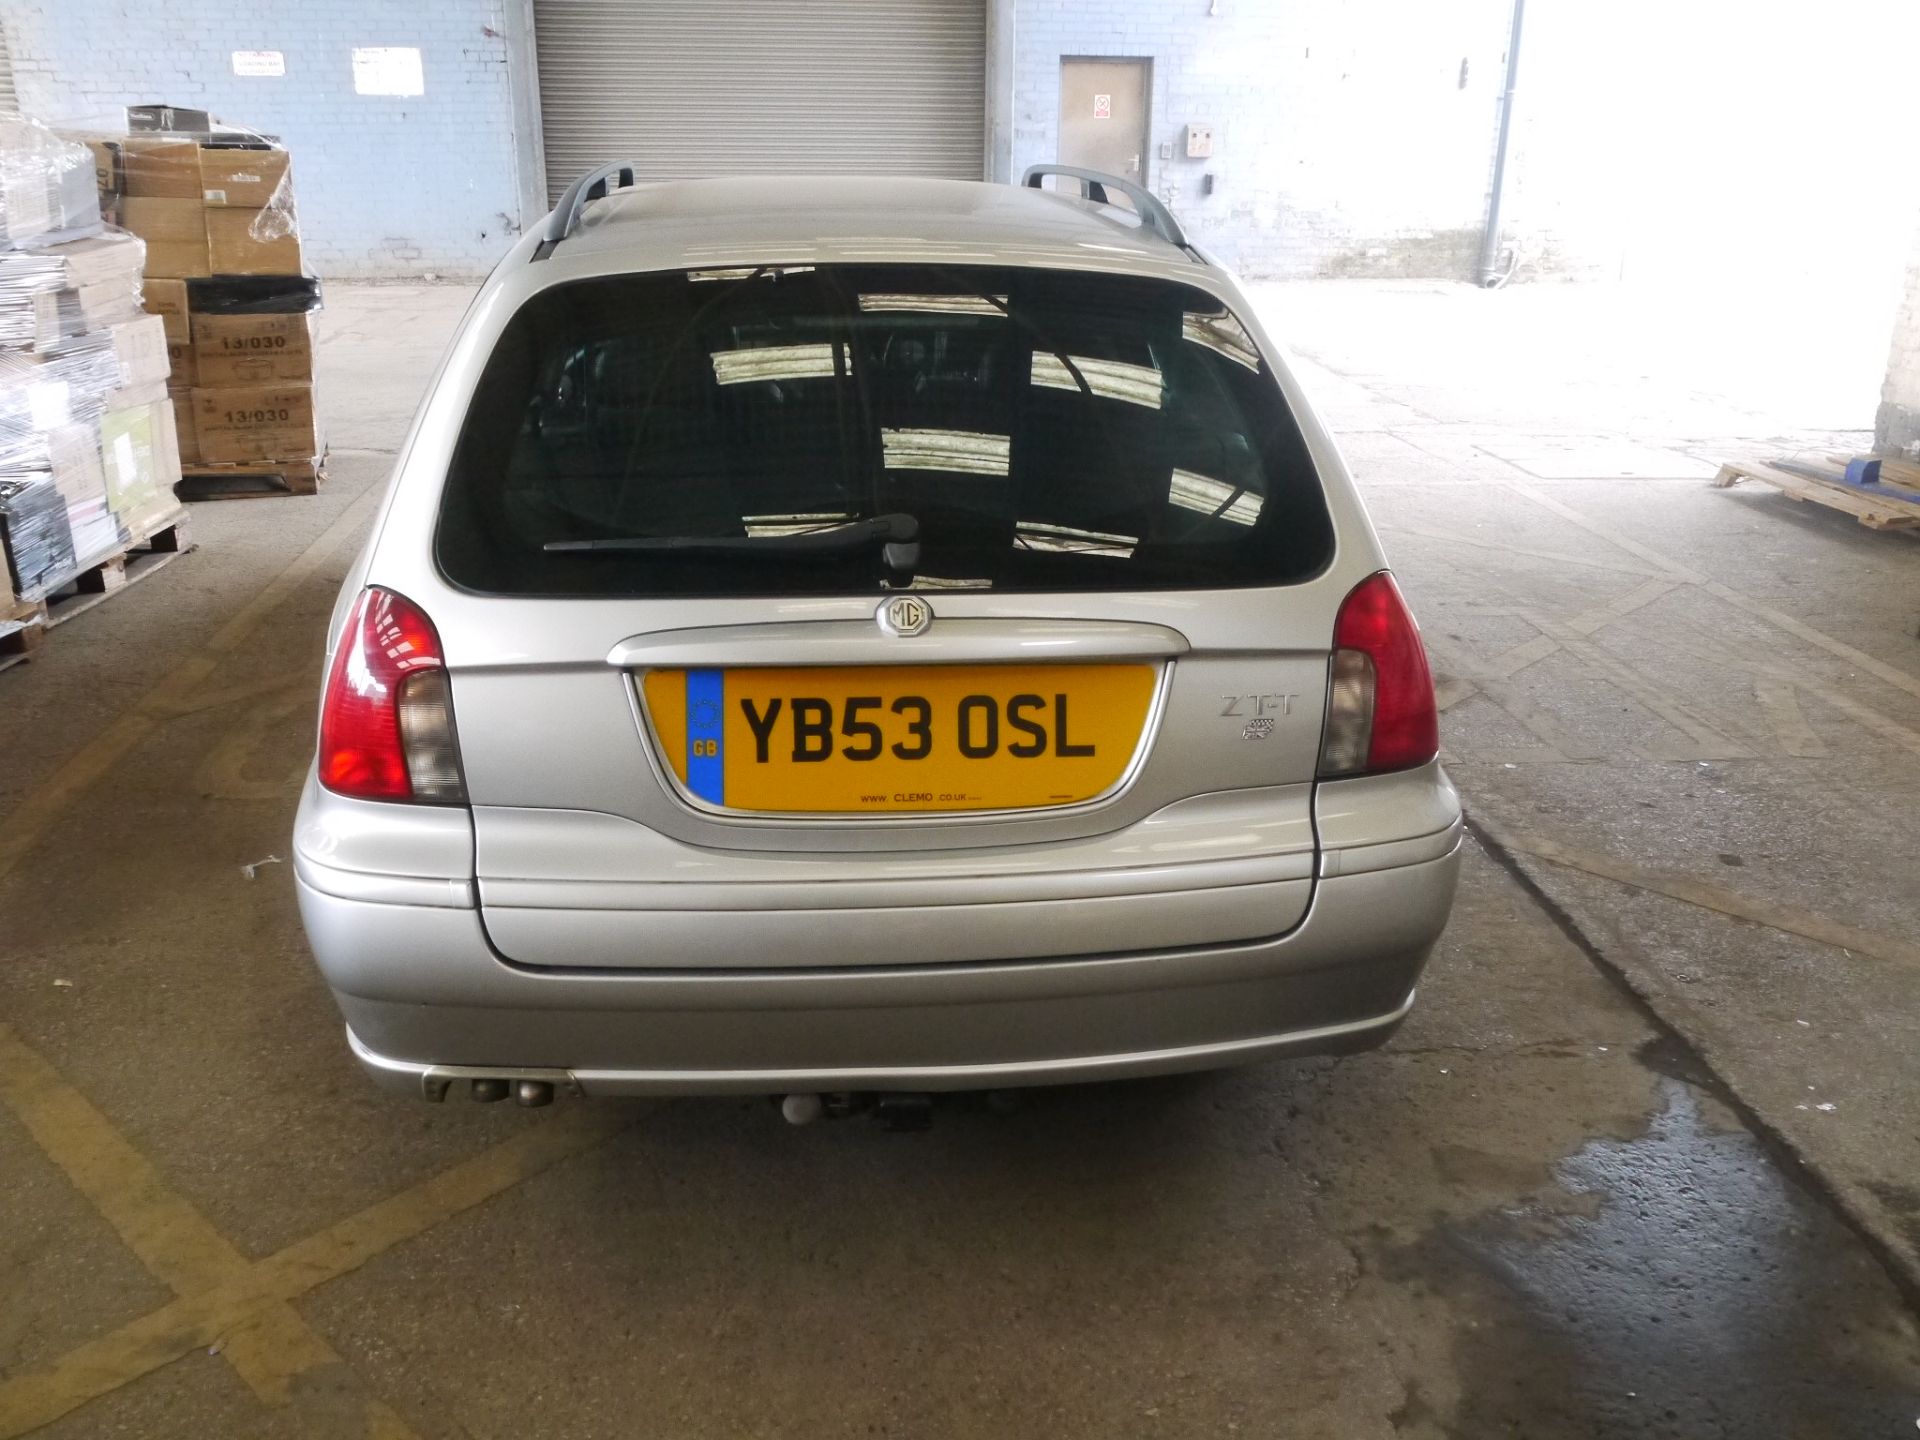 53 Plate MG ZT-T CDTI 2lr Diesel Estate Car, 133,450 miles unchecked but seem to match previous MOT - Image 4 of 11